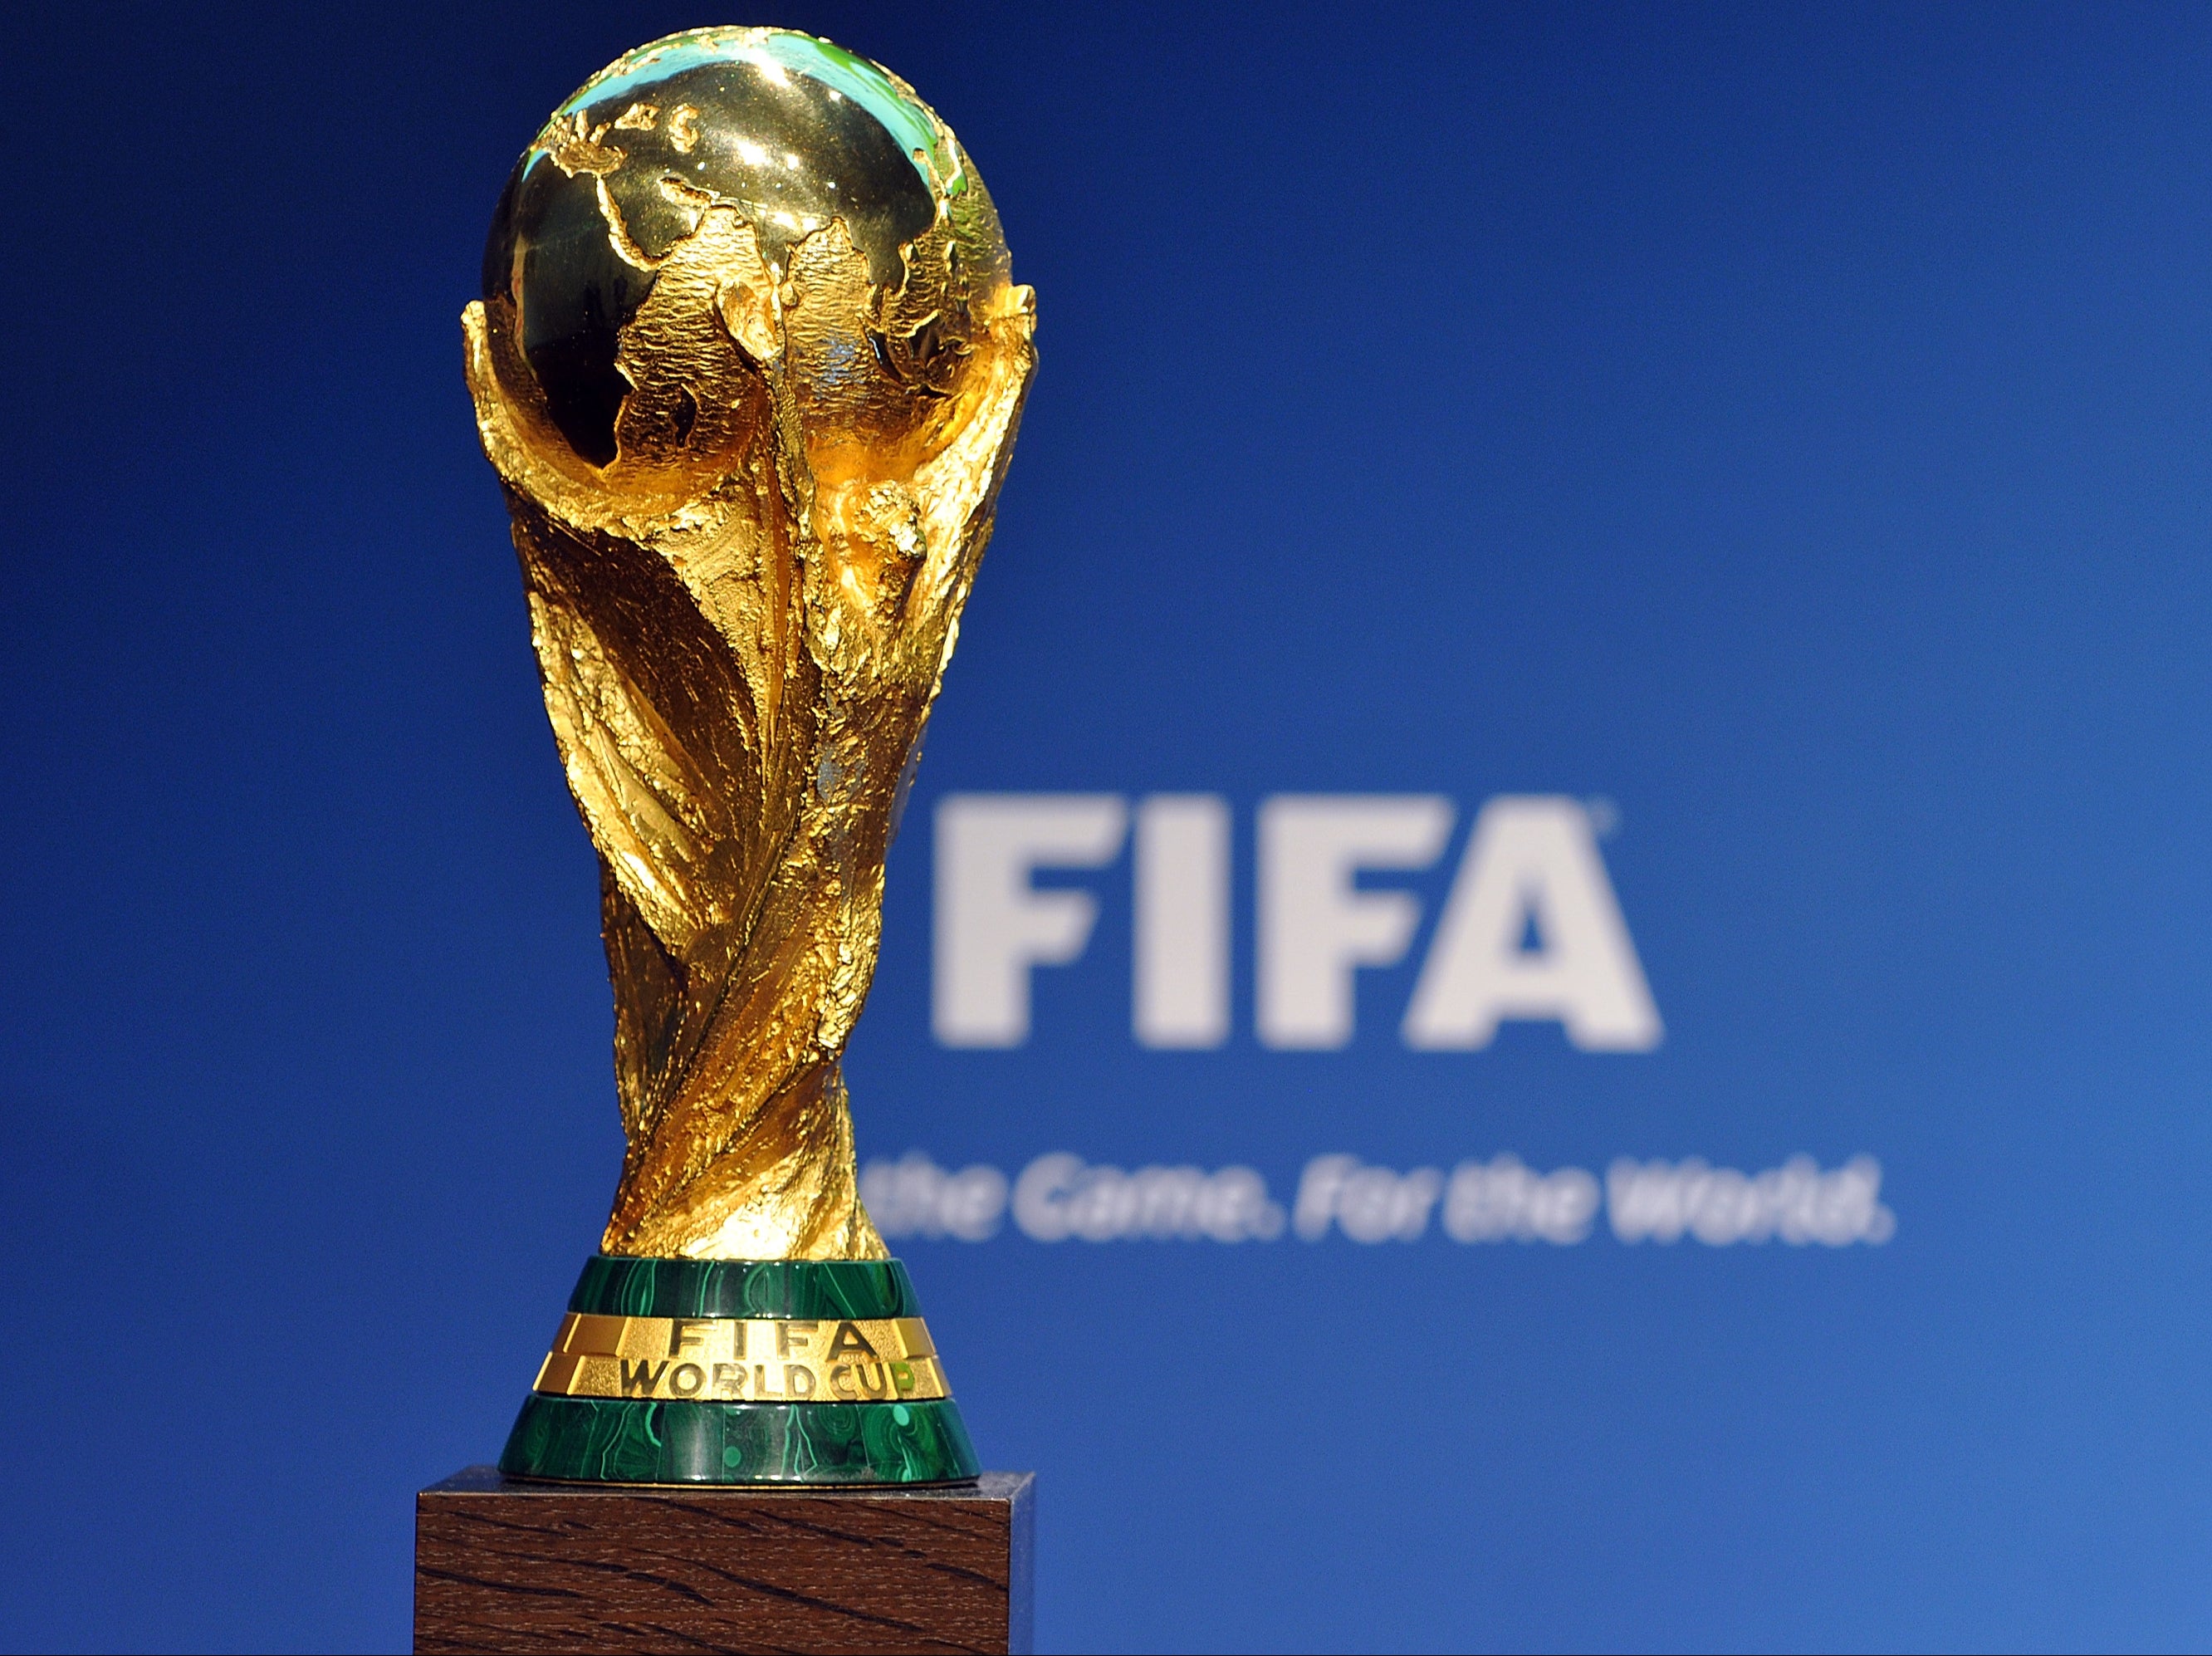 The UK and Ireland are hoping to land the 2030 World Cup